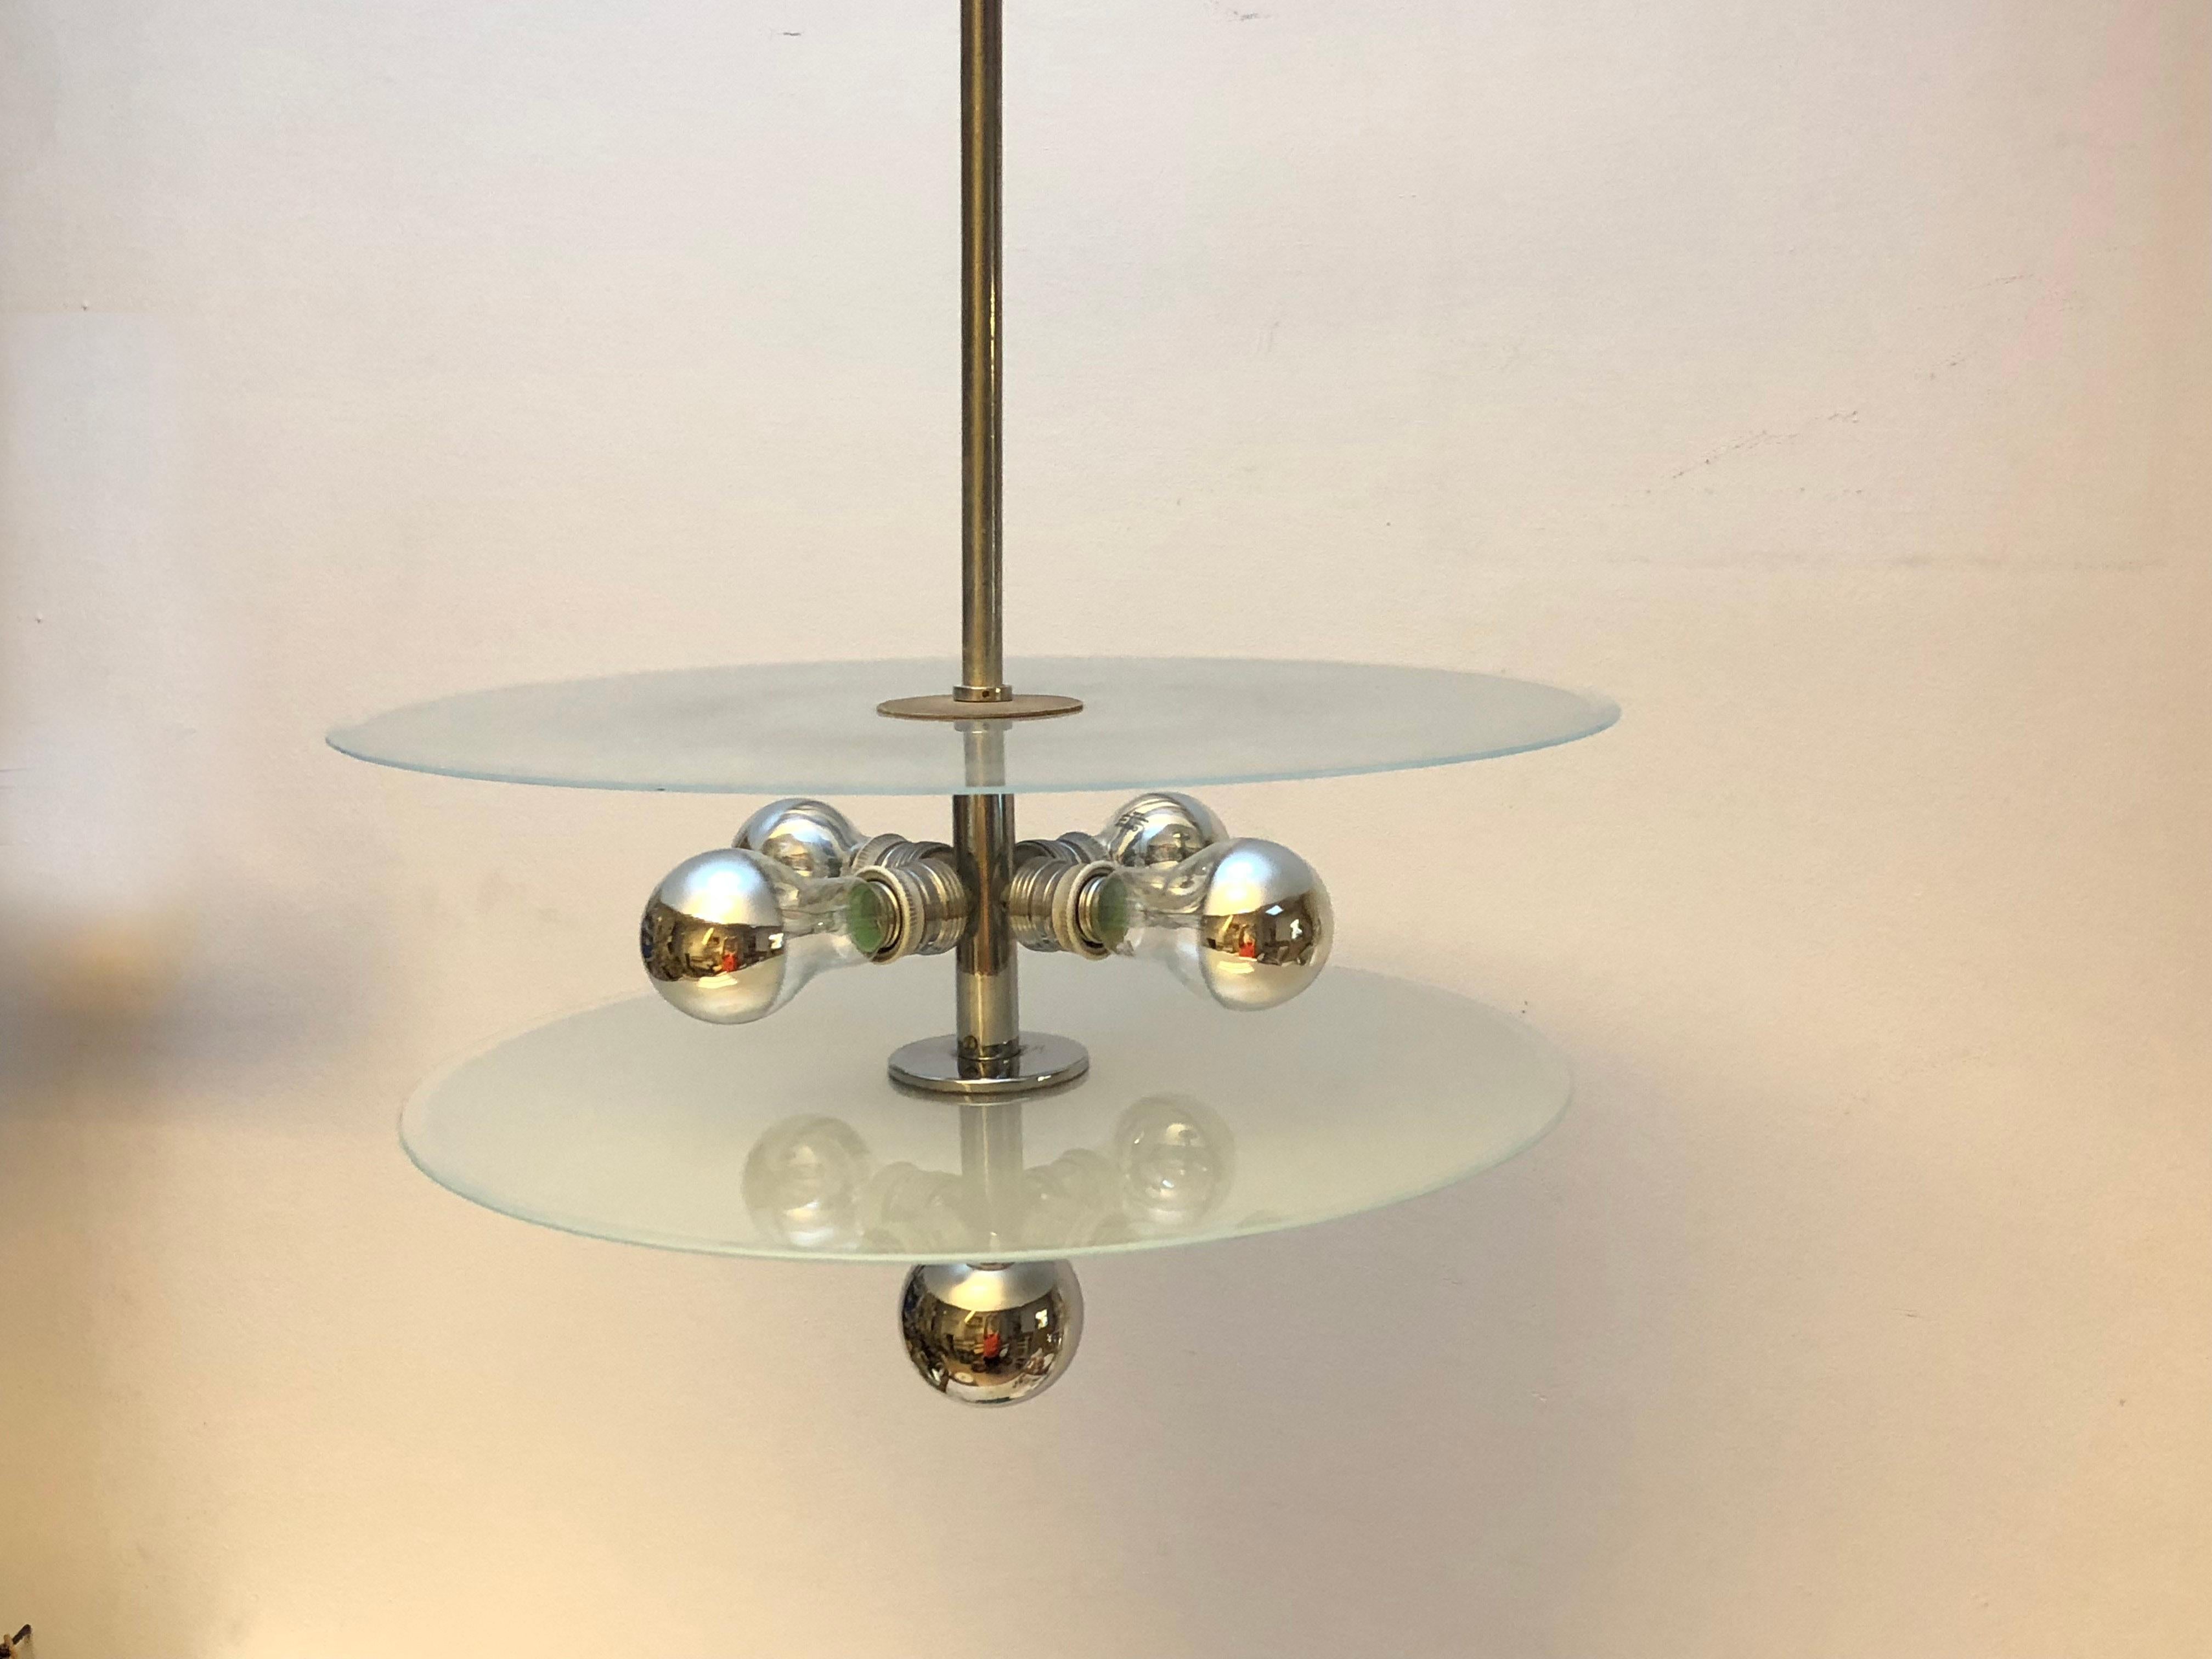 Czech Bauhaus Chandelier by Schwintzer & Graeff from the 1930s For Sale